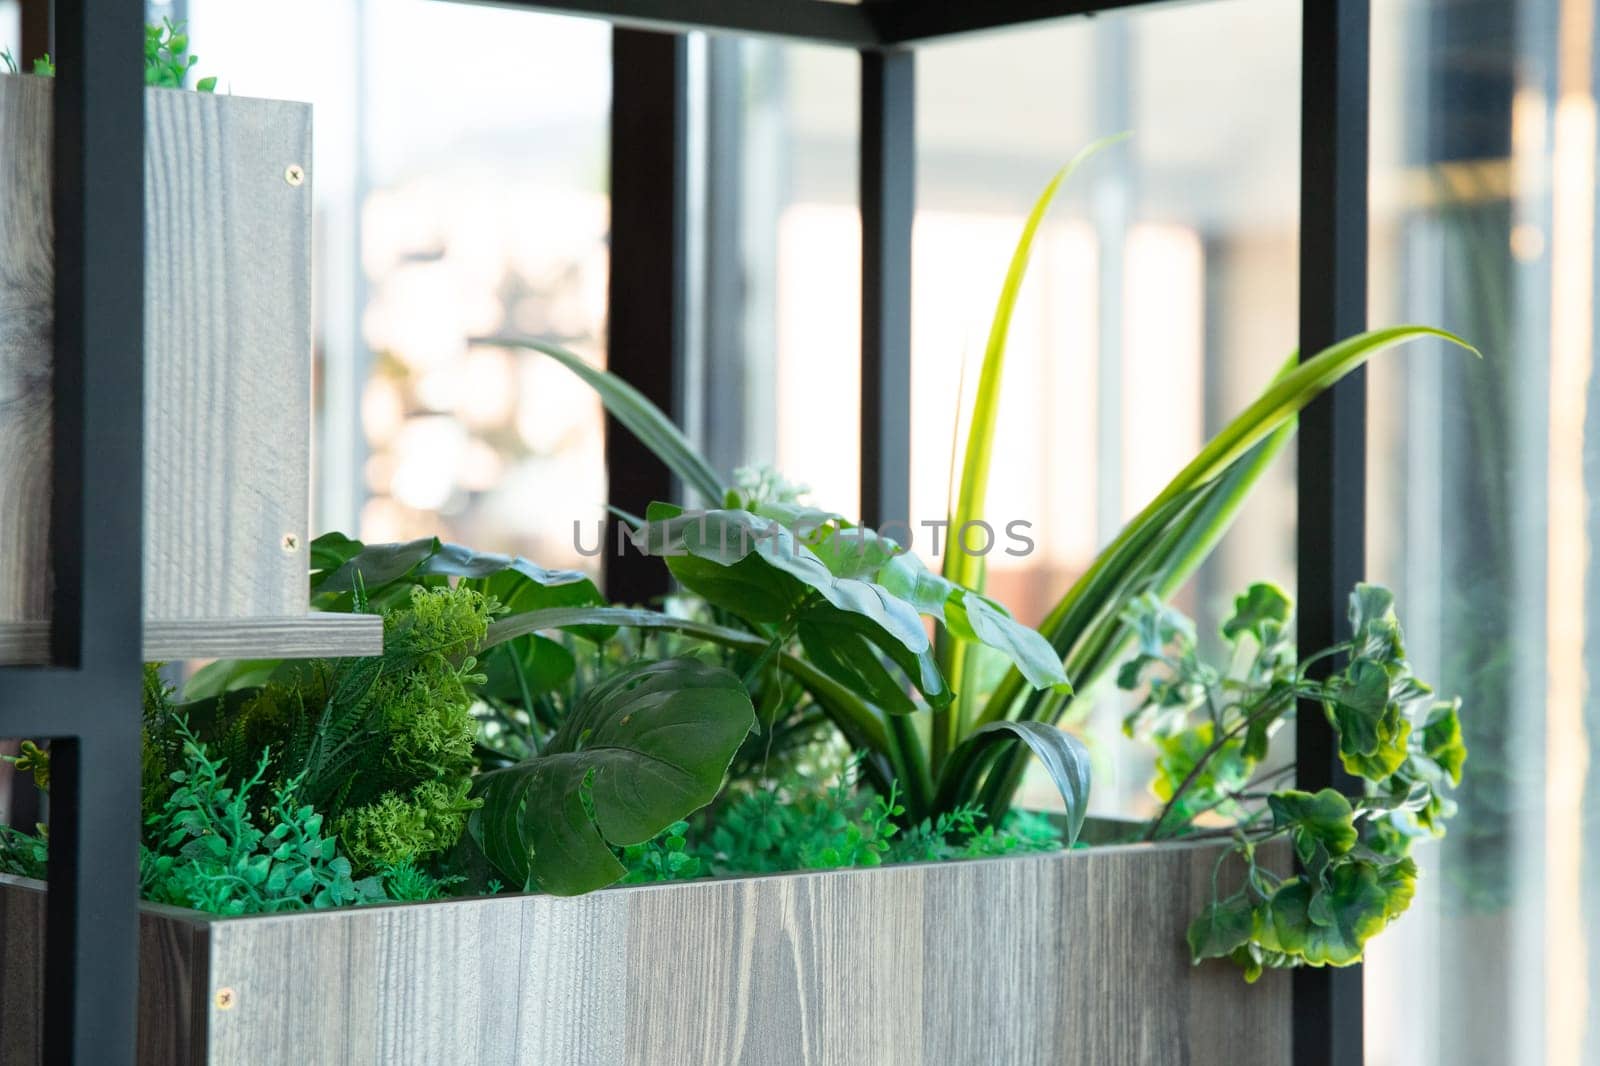 Decorative plastic plants on a rack in the interior by the window by Rom4ek